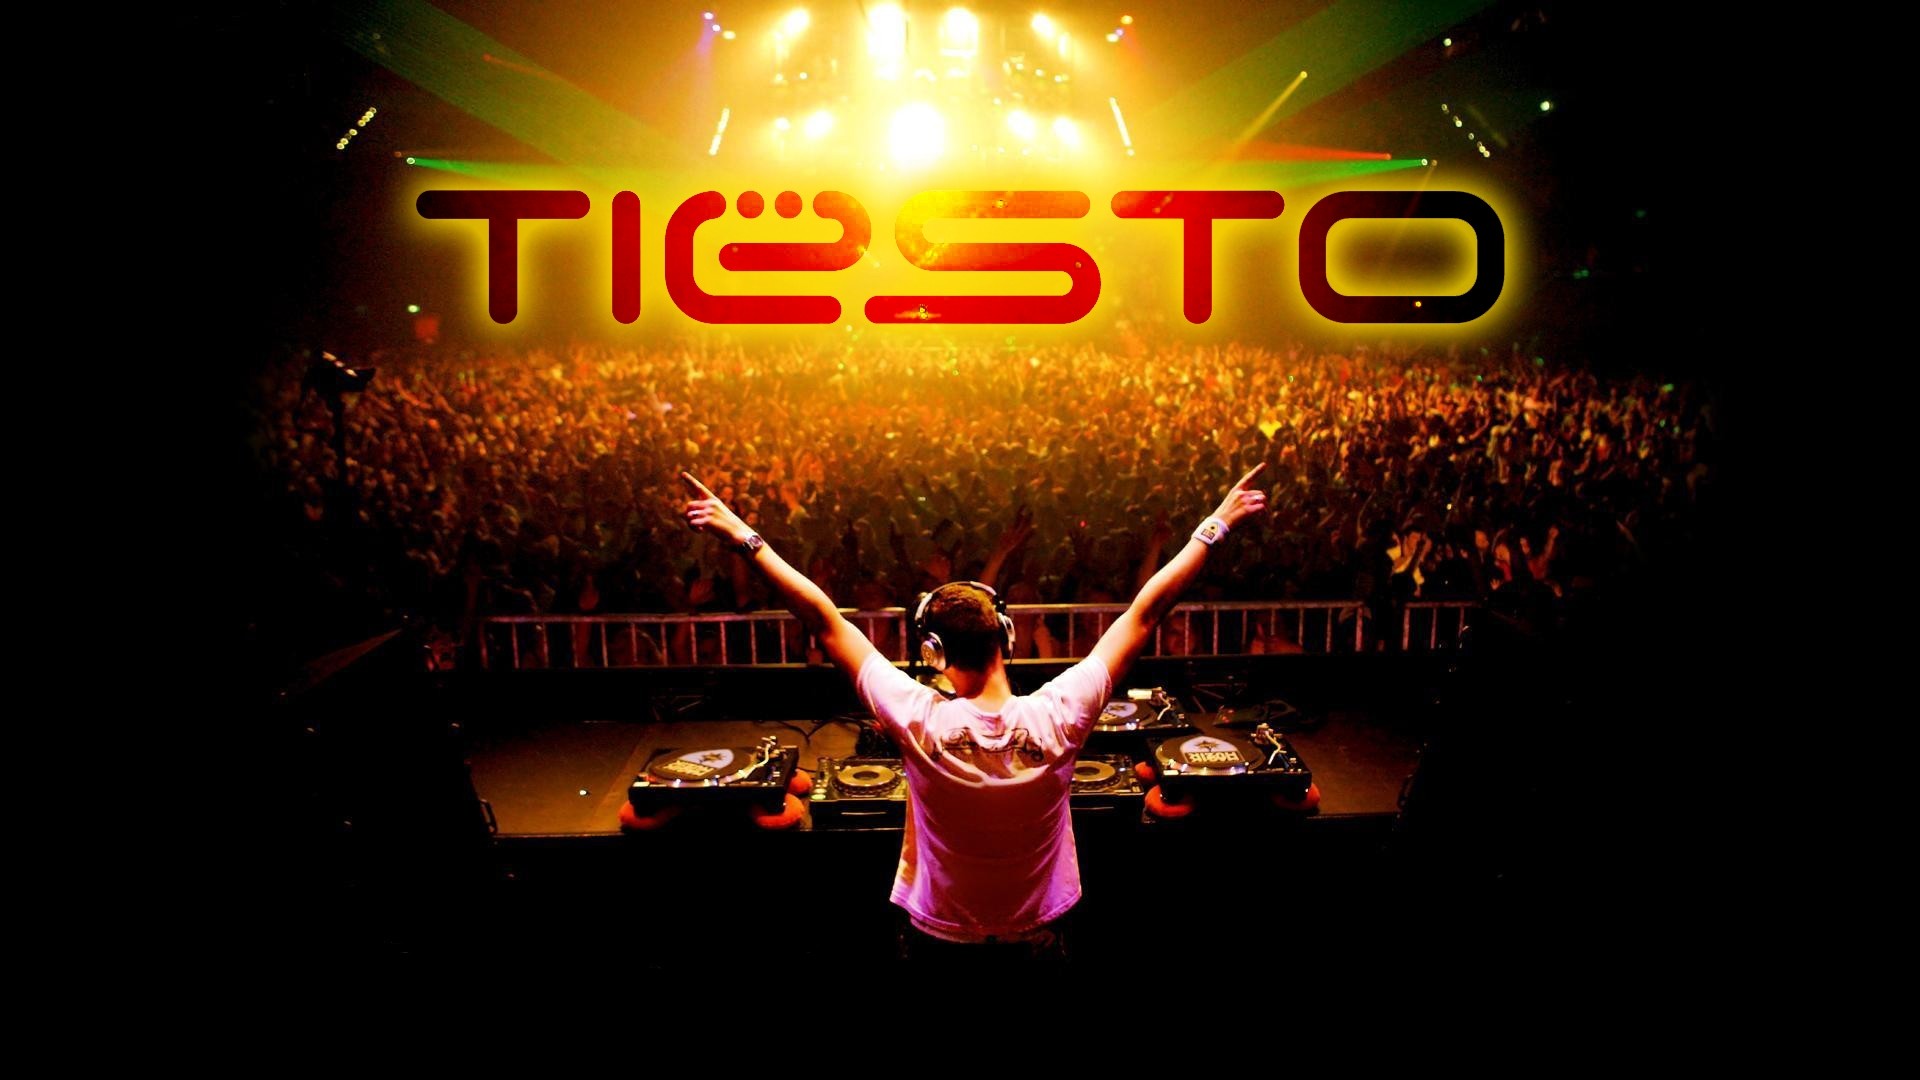 1920x1080 Get the latest dj tiesto, letters, crowd news, pictures and videos and  learn all about dj tiesto, letters, crowd from wallpapers4u.org, your  wallpaper news ...